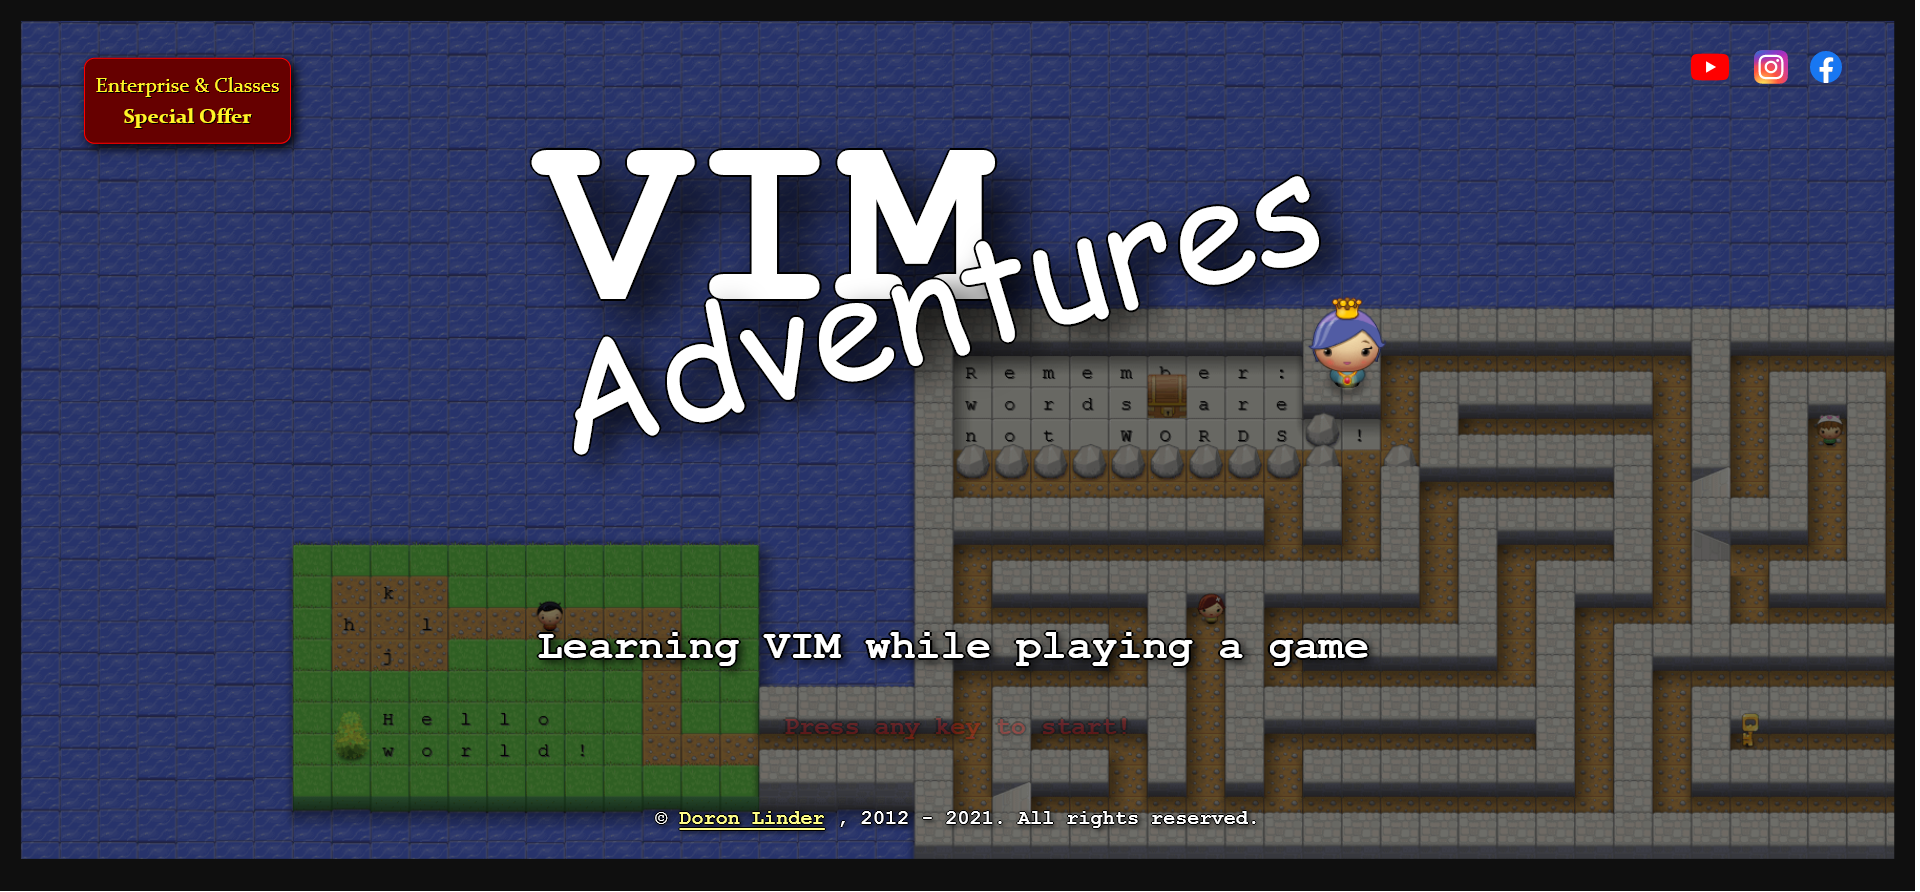 Screenshot 2021-05-07 at 11-35-10 Learn VIM while playing a game - VIM Adventures.png